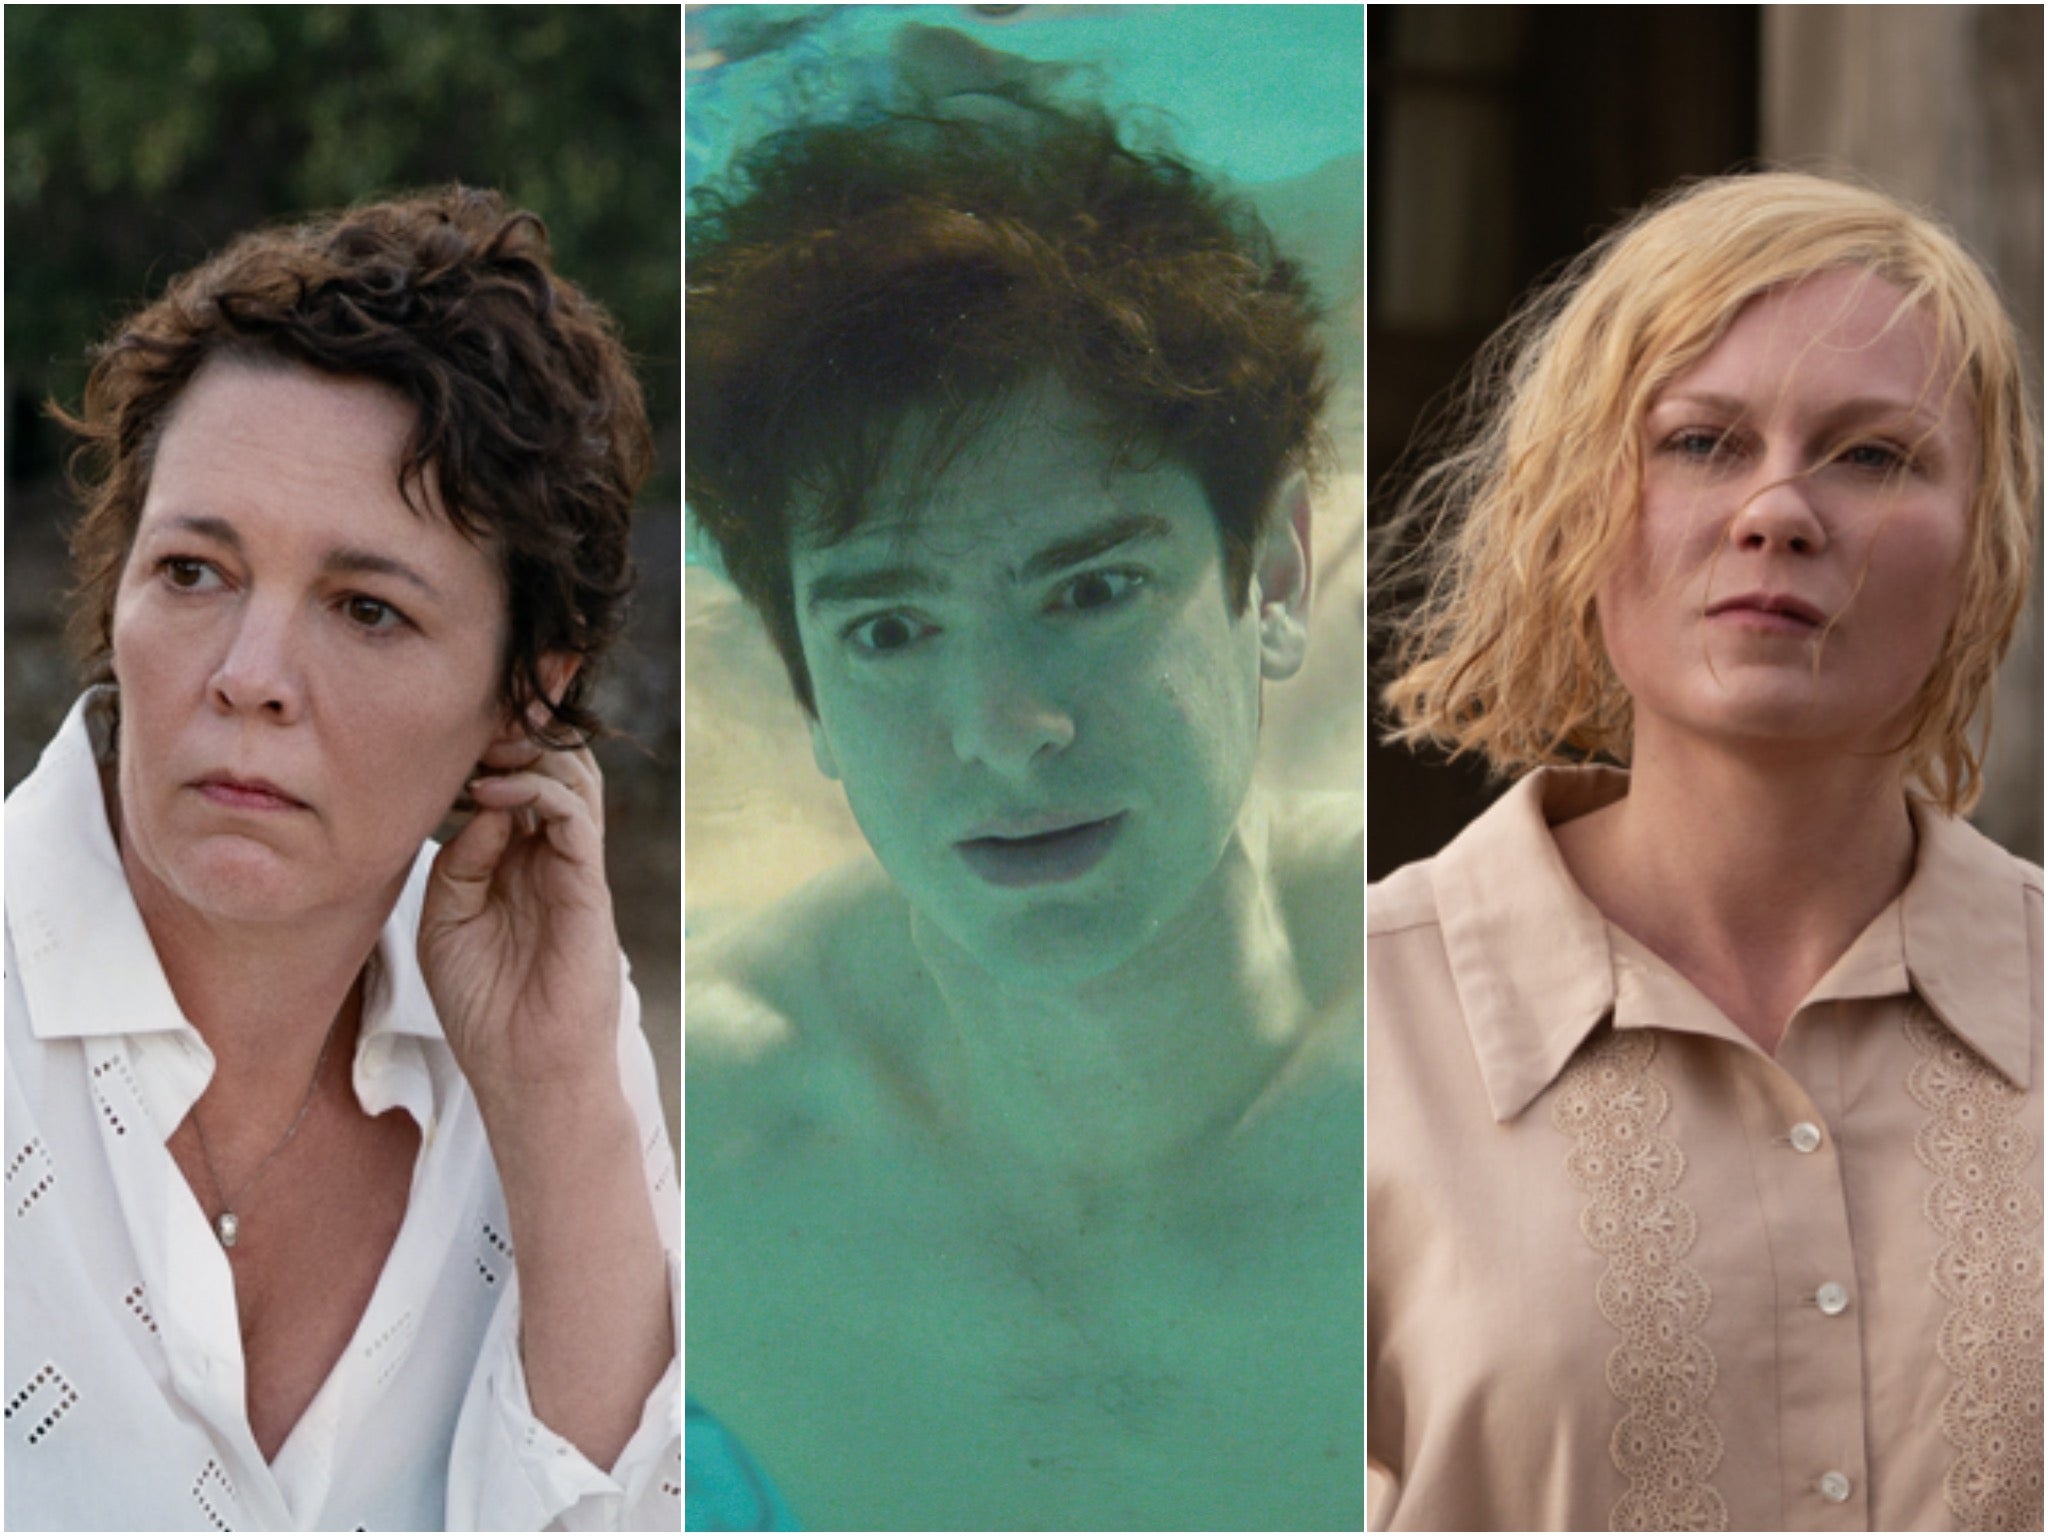 Snubbed!: Olivia Colman, Andrew Garfield and Kirsten Dunst